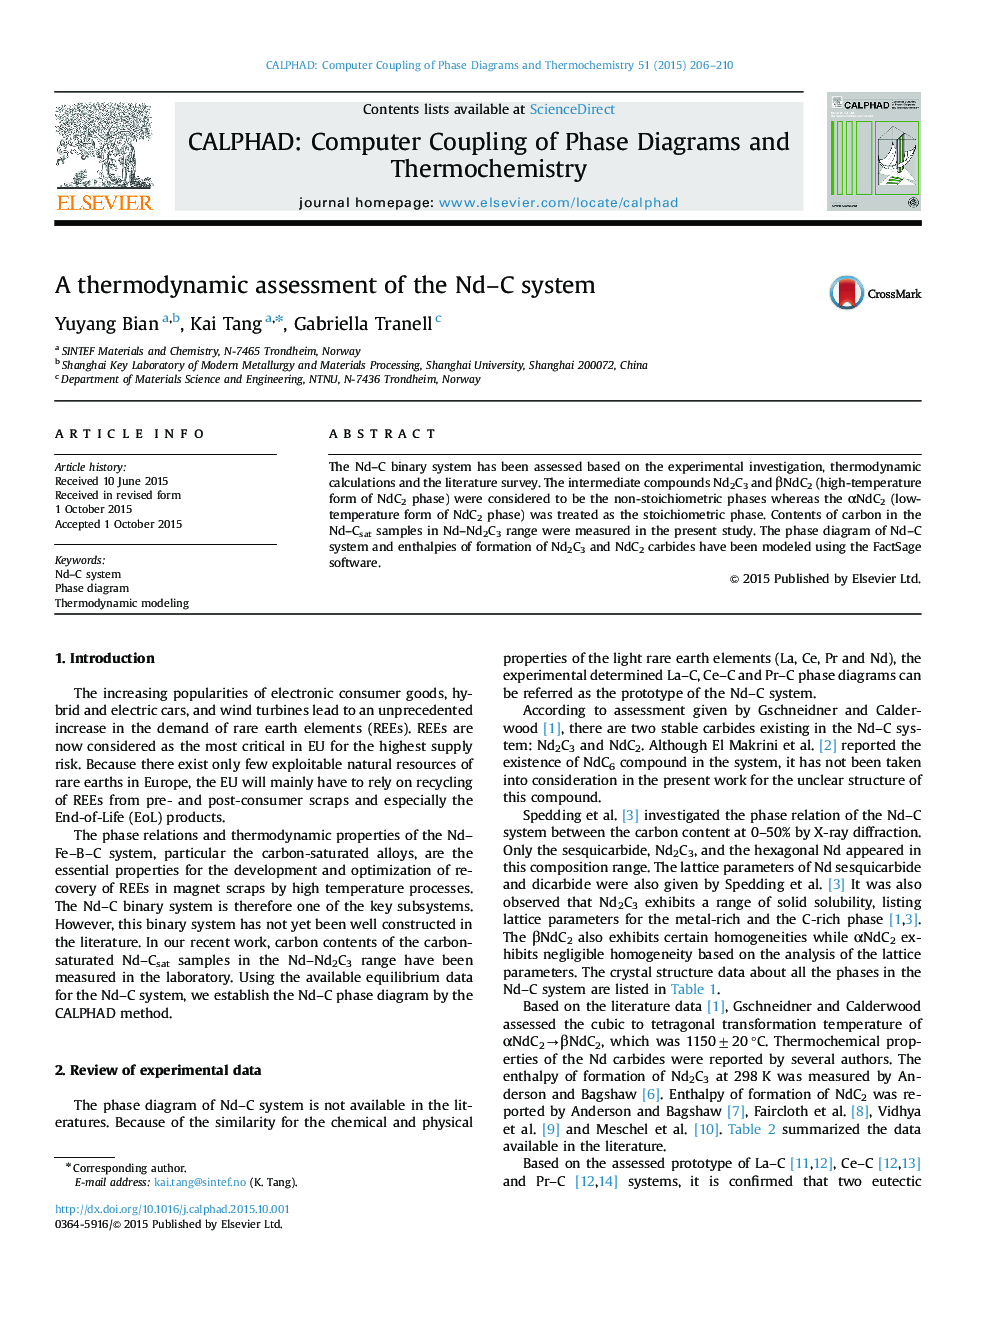 A thermodynamic assessment of the Nd-C system